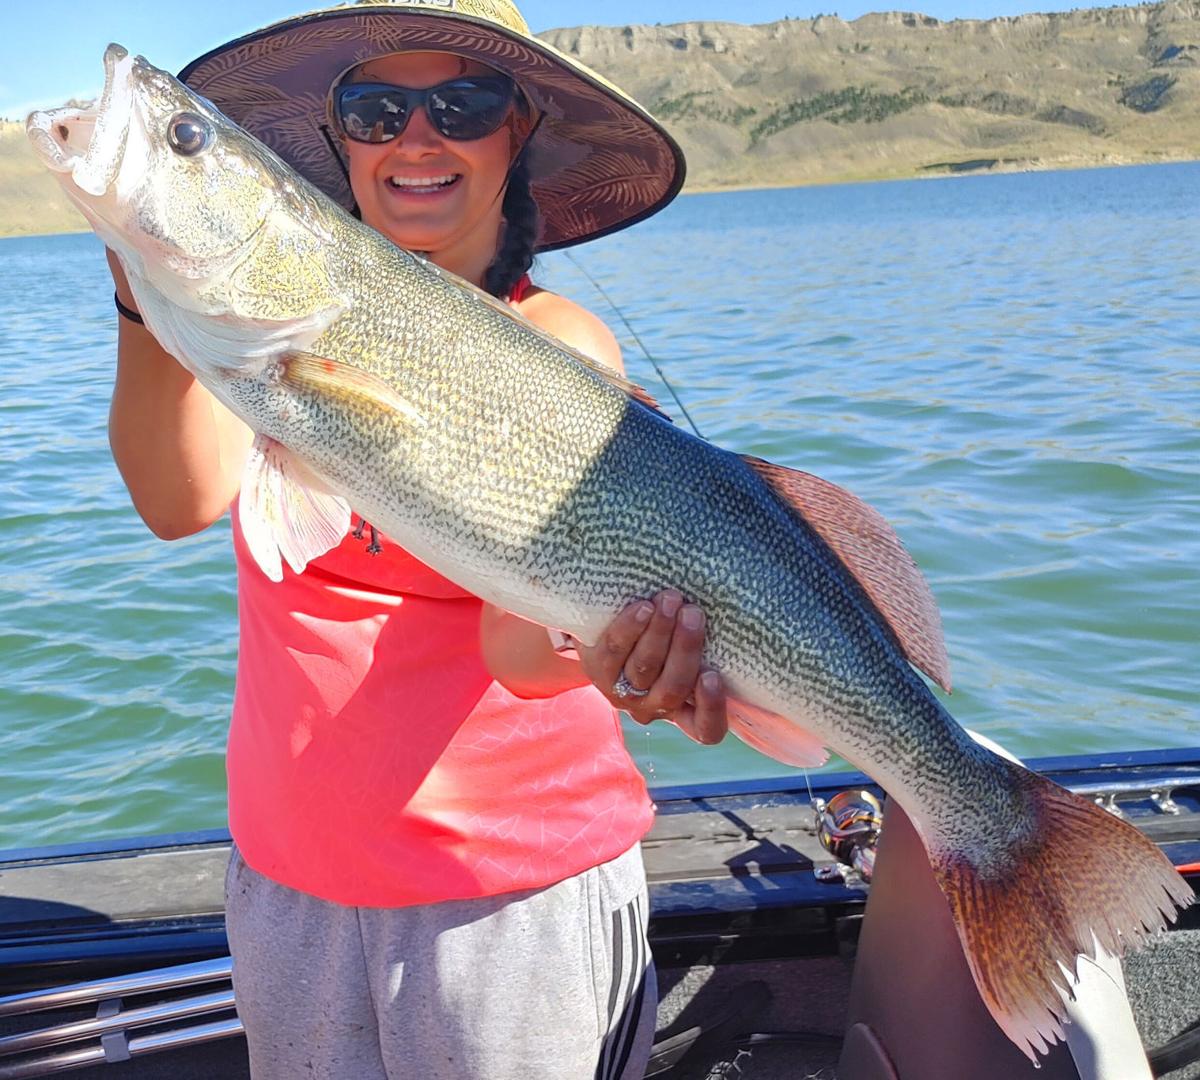 Fishing report: Phenomenal walleye at Fort Peck's Crooked Creek tourney